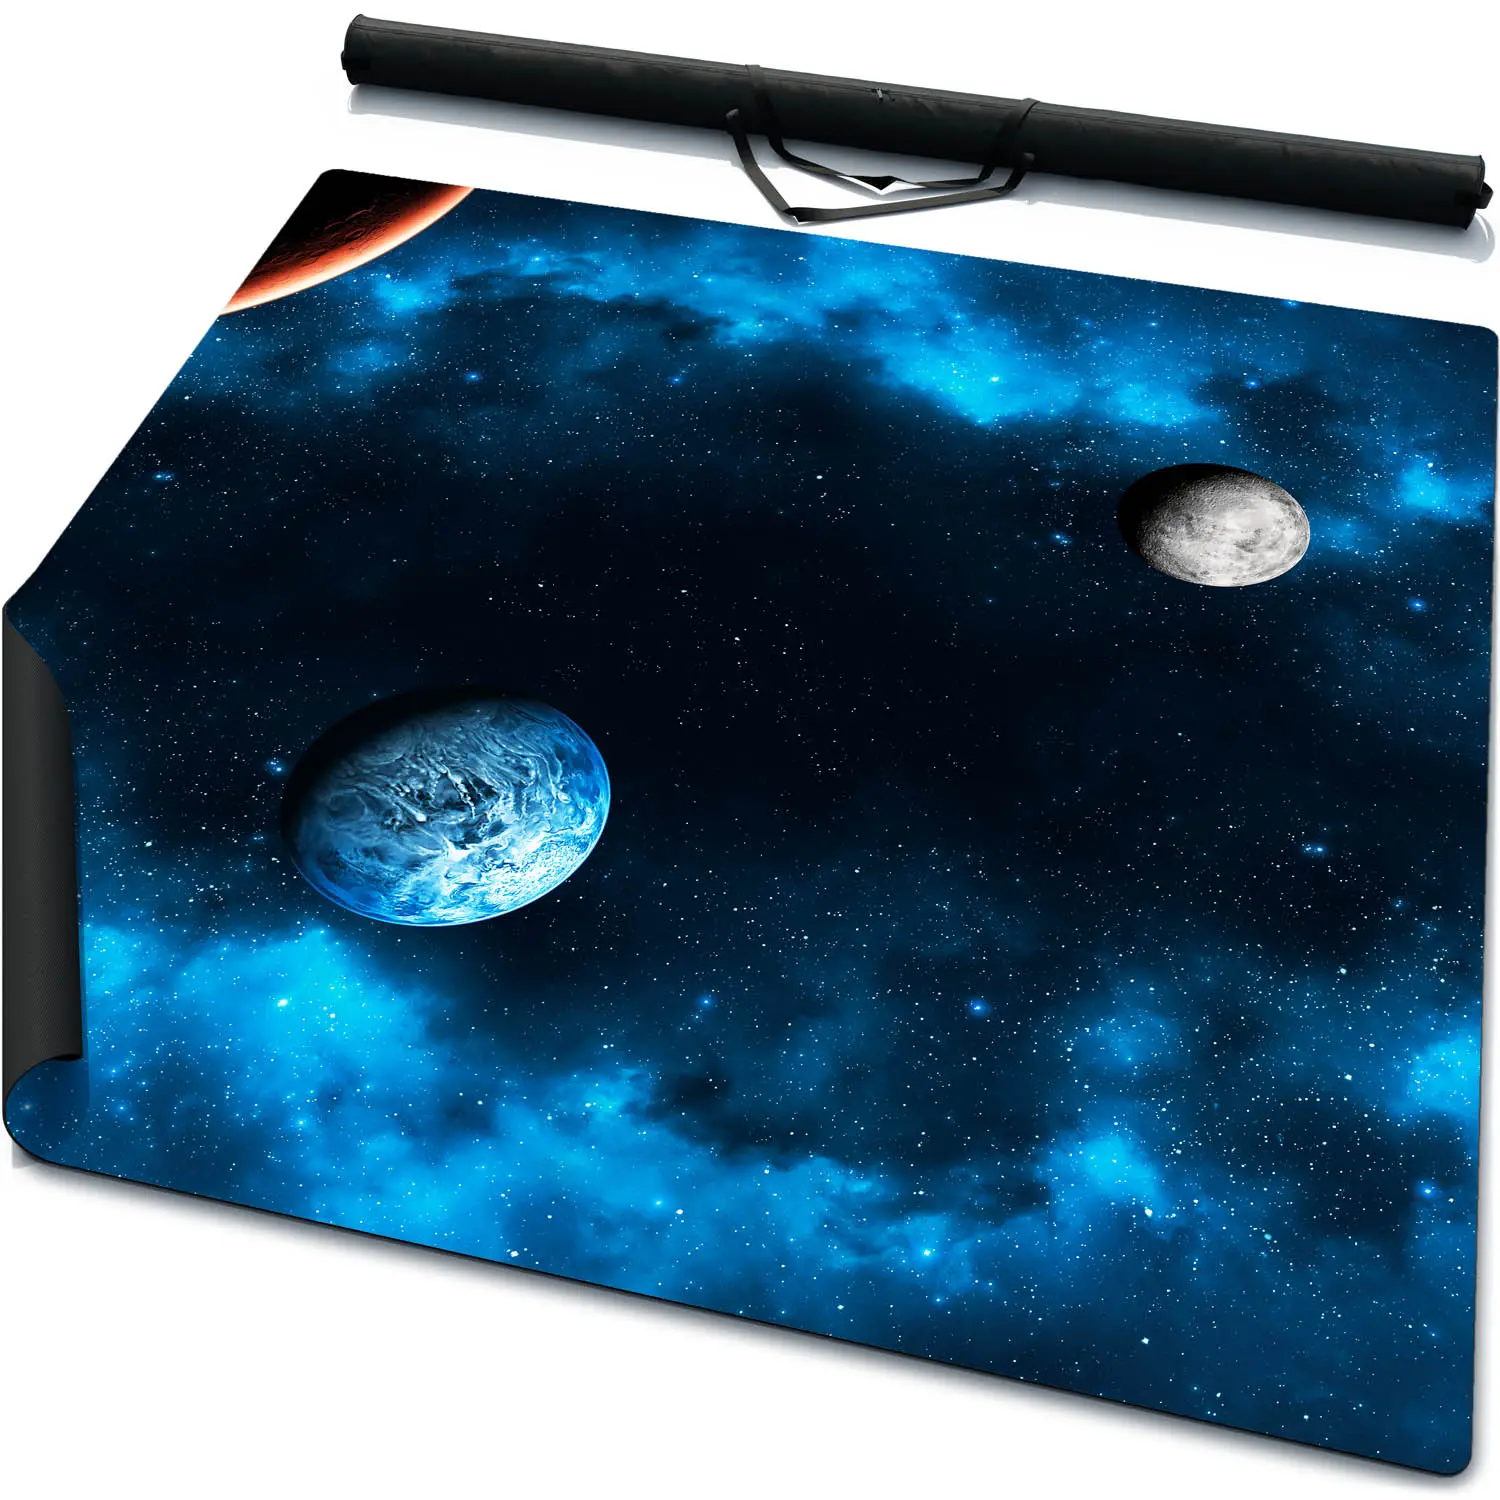 Textured Deep Space Wargaming Battle Mat With Black Carry Bag